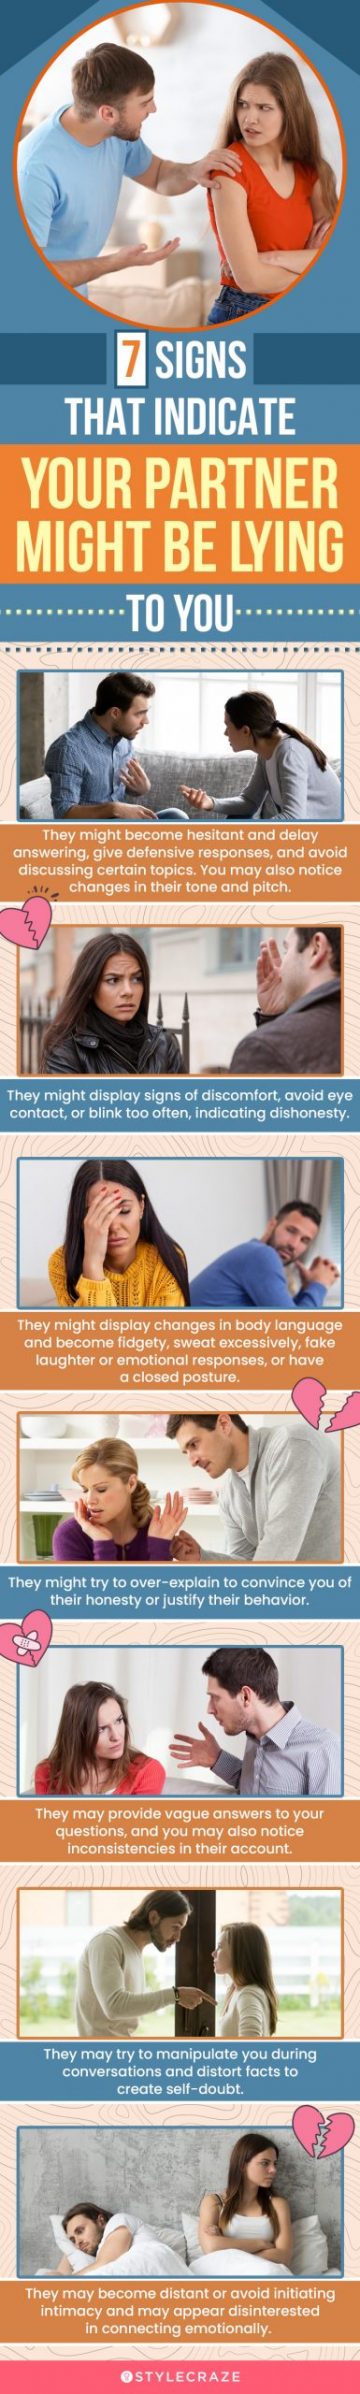 7 signs that indicate your partner might be lying to you (infographic)